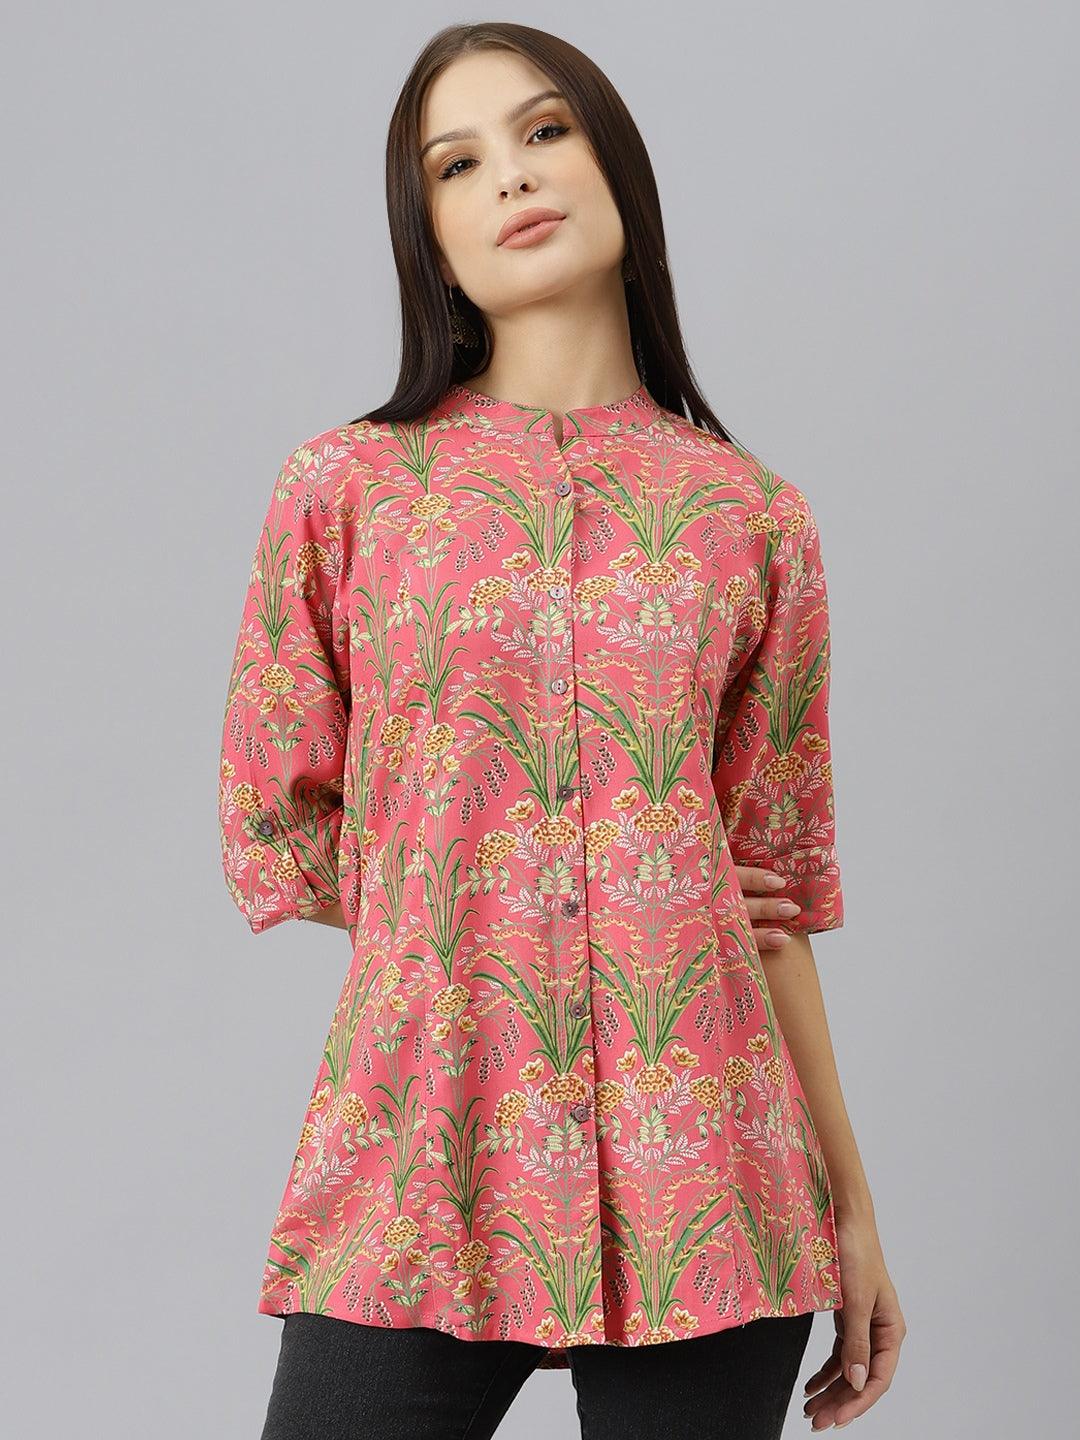 Dark Pink Floral Rayon A-line Shirts Style Top